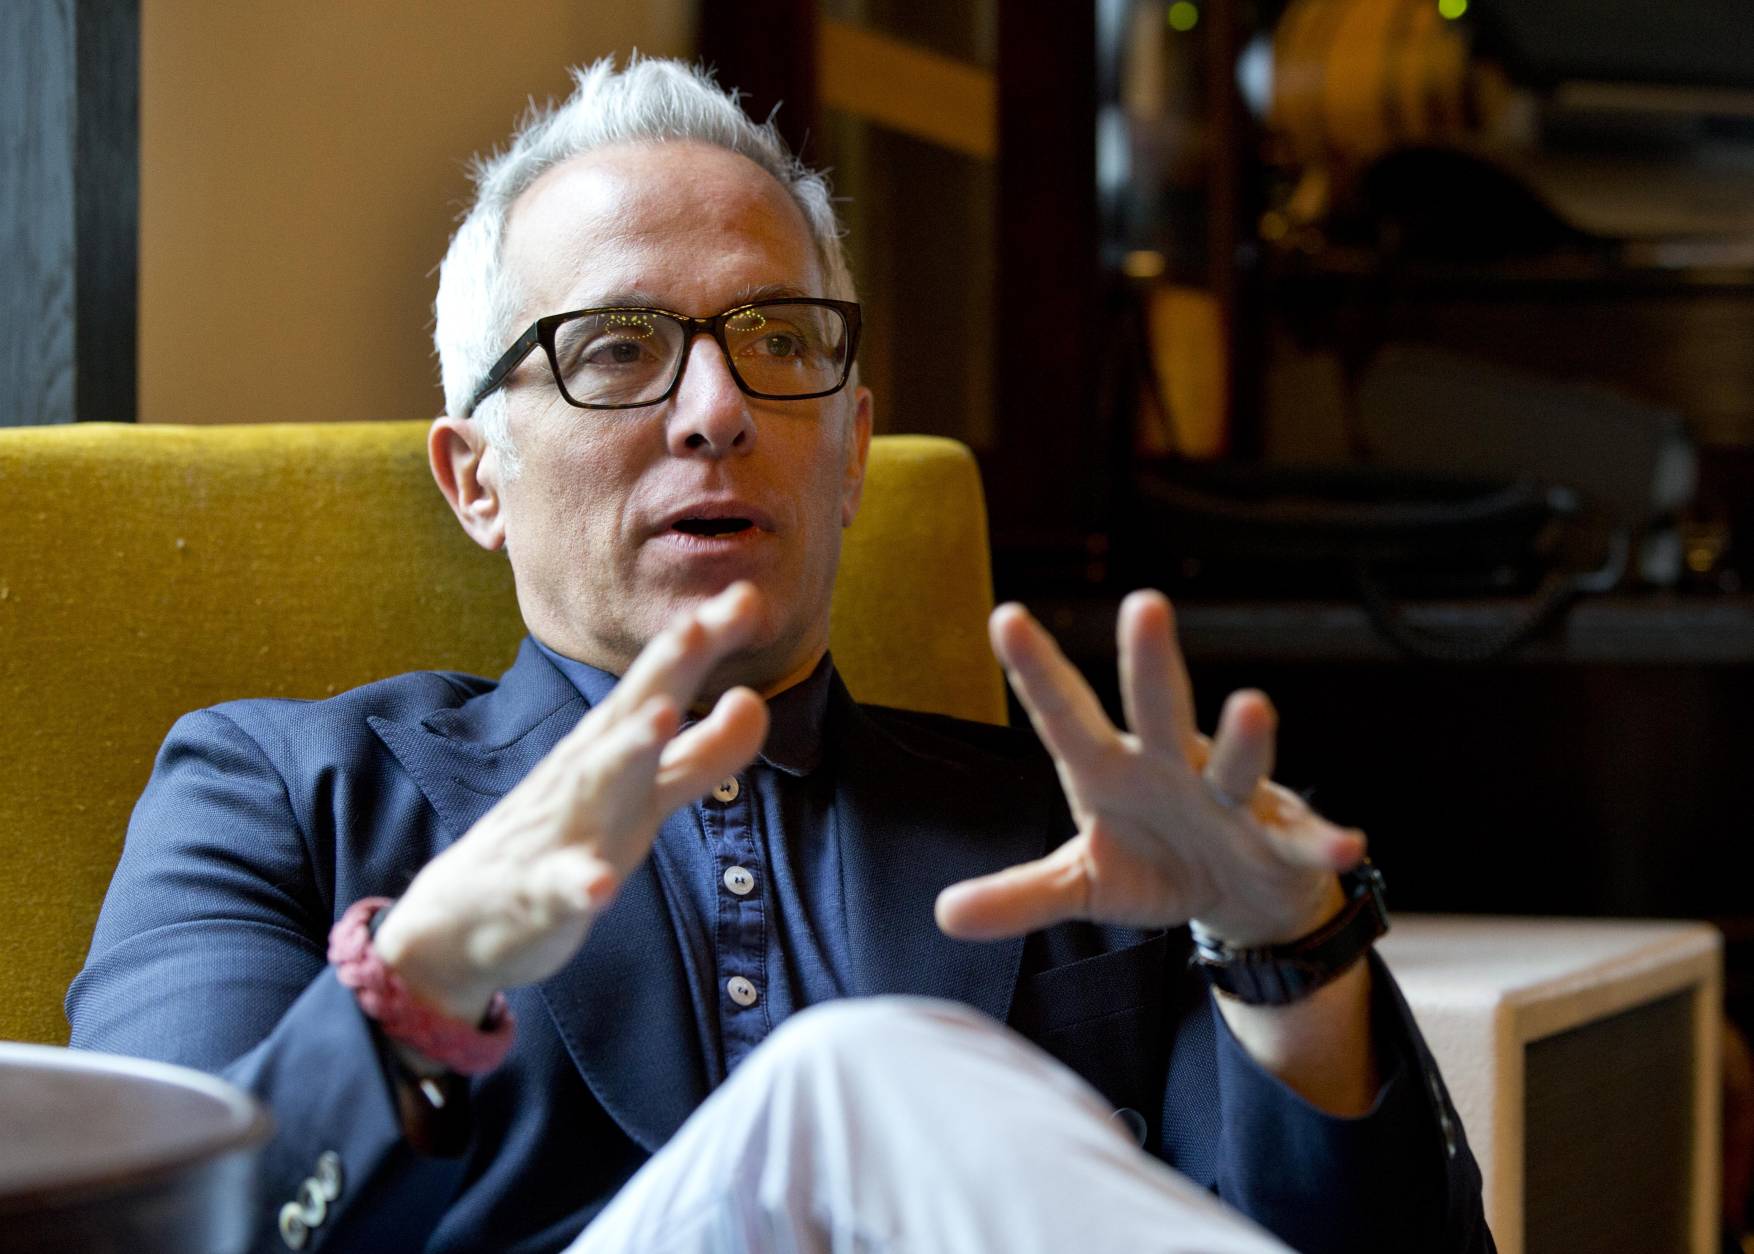 Chef Geoffrey Zakarian gestures as he speaks during an interview with The Associated Press, Friday, Feb. 20, 2015, in Miami Beach, Fla. Now honored with an Iron Chef title, a judging seat on "Chopped" and a best-selling cookbook, Zakarian says opening a restaurant is a lot like playing poker. "It's a crap shoot. We gamble when we open a restaurant," said Zakarian, whose restaurants include The Lambs Club and The National. (AP Photo/Wilfredo Lee)